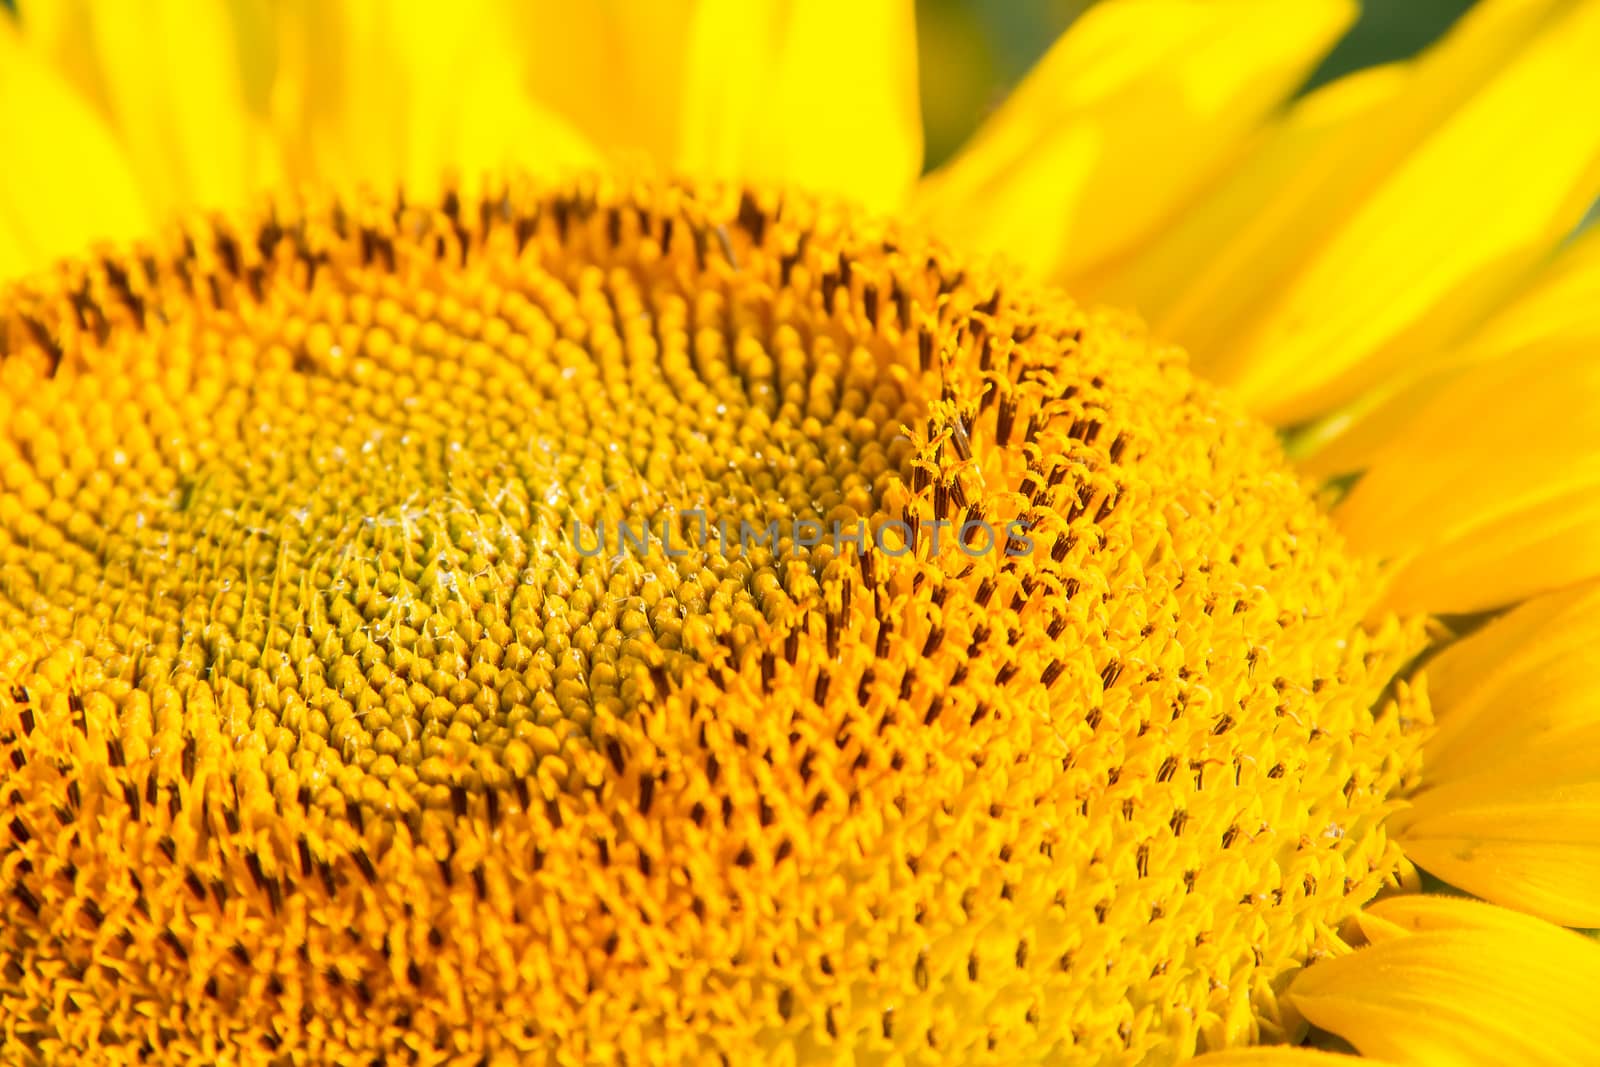 Angled view of head of a Sunflower with nectar. Image taken with a shallow depth of field to create a space for writing 